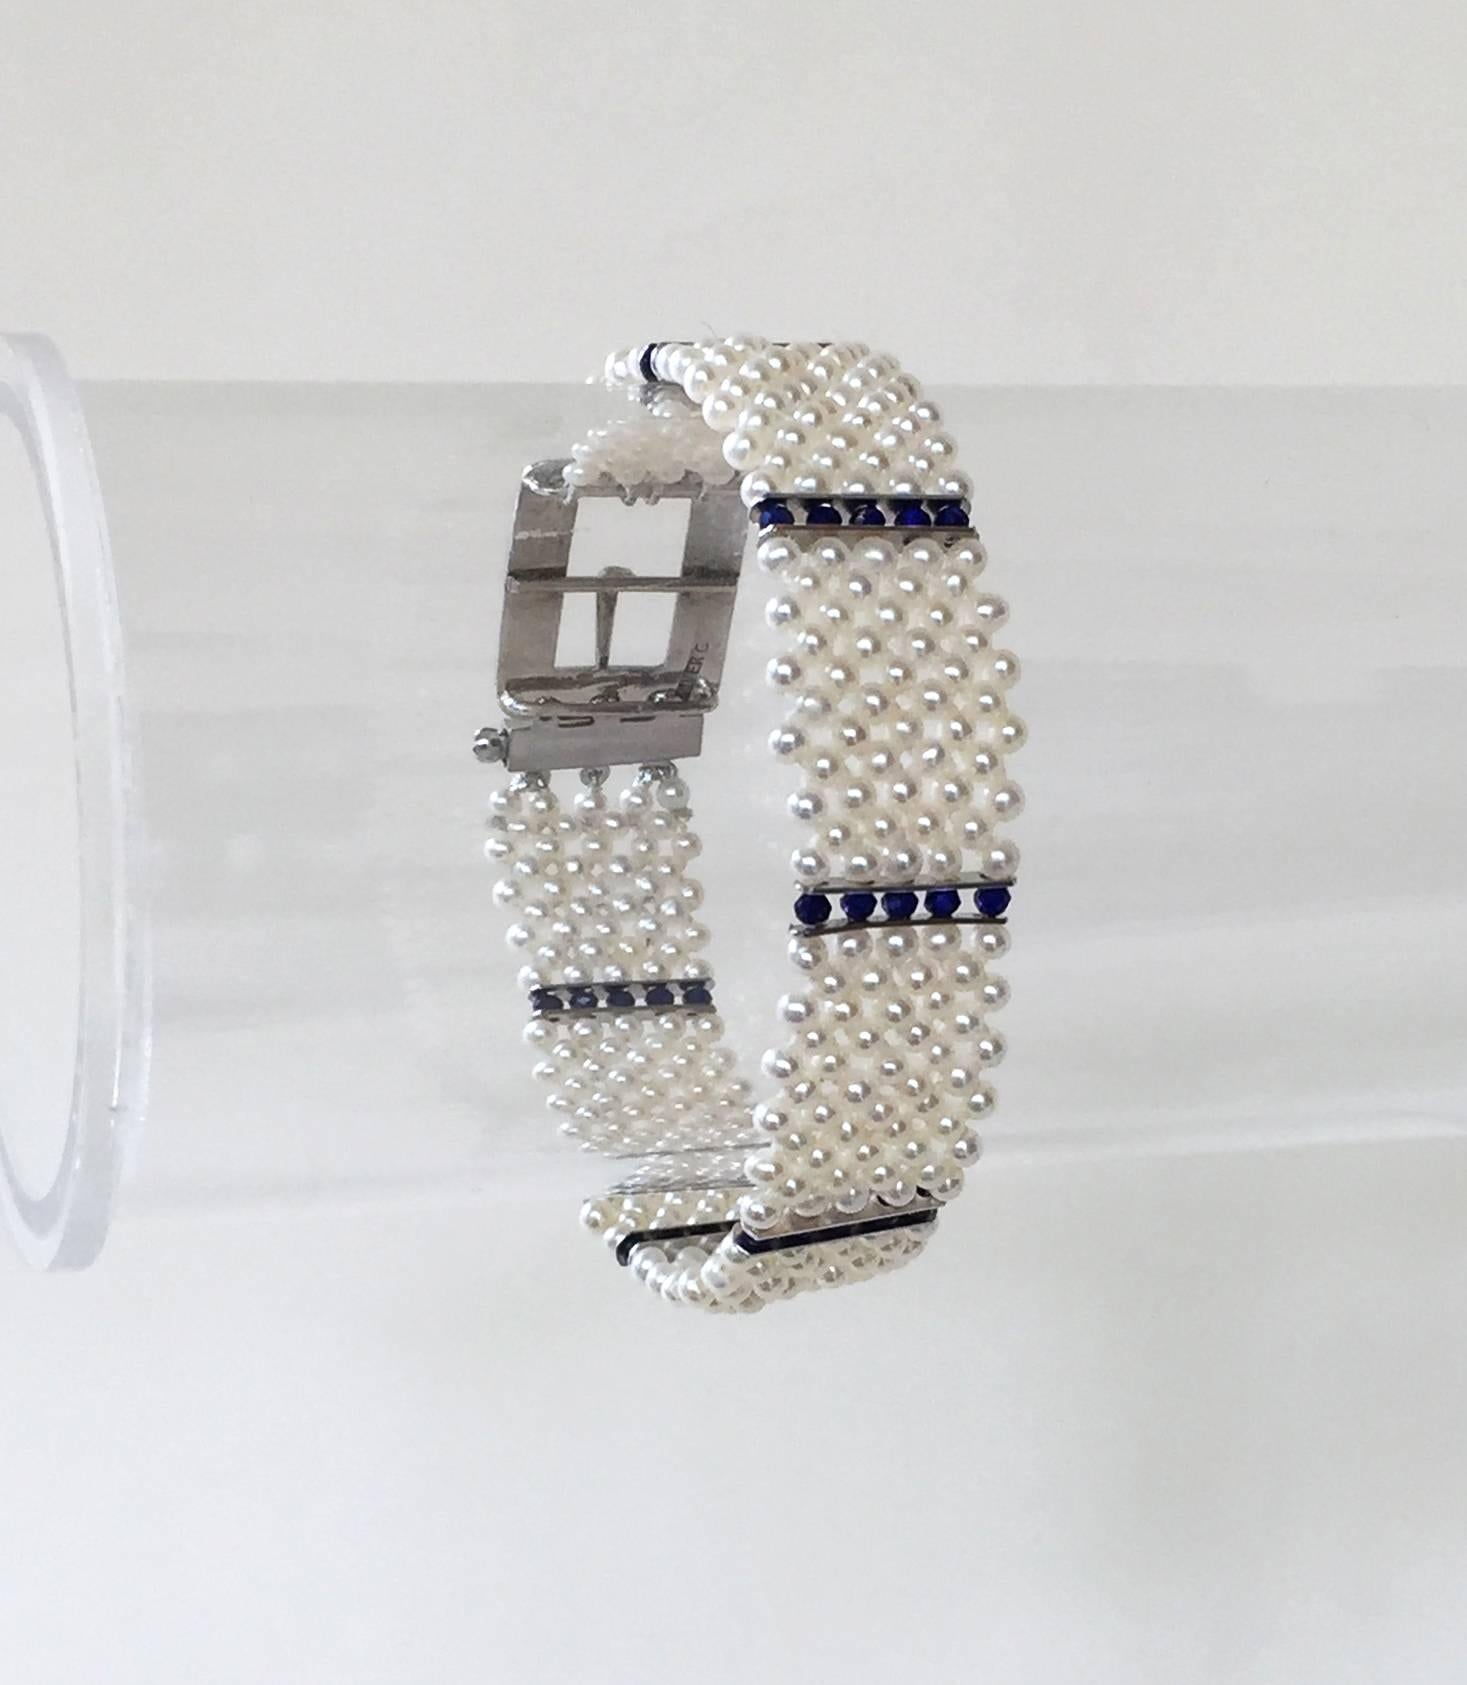 This delicate , yet strong and sturdy bracelet gracefully sits on the wrist. With an elegant and re-enforced weave of the finest white pearls accented by lapis lazuli faceted beads and 14k white gold dividers, the bracelet has a striking design. The